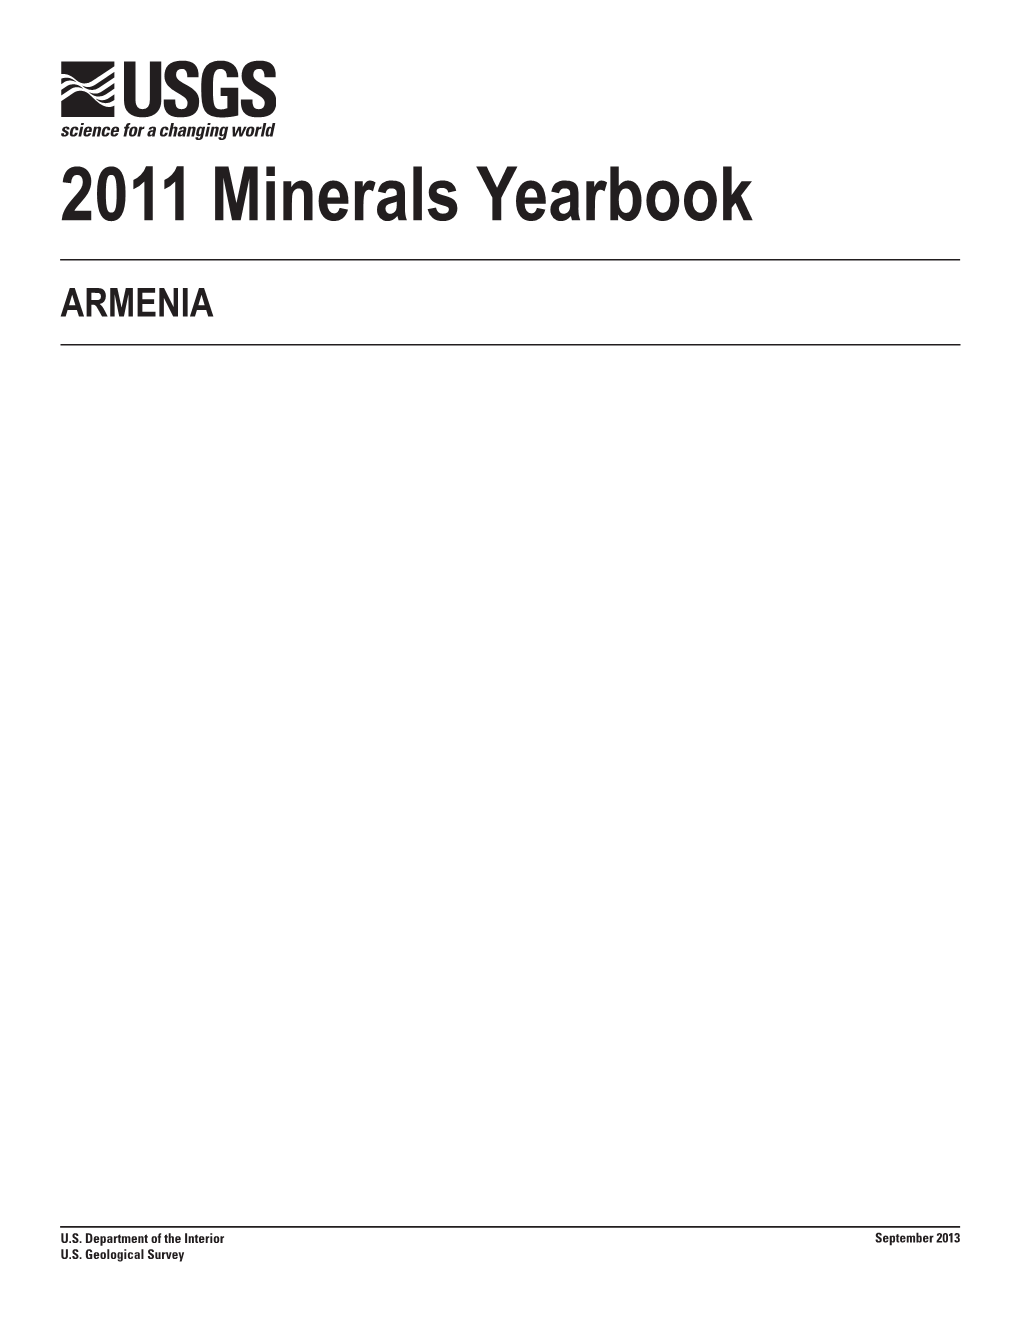 The Mineral Industry of Armenia in 2011